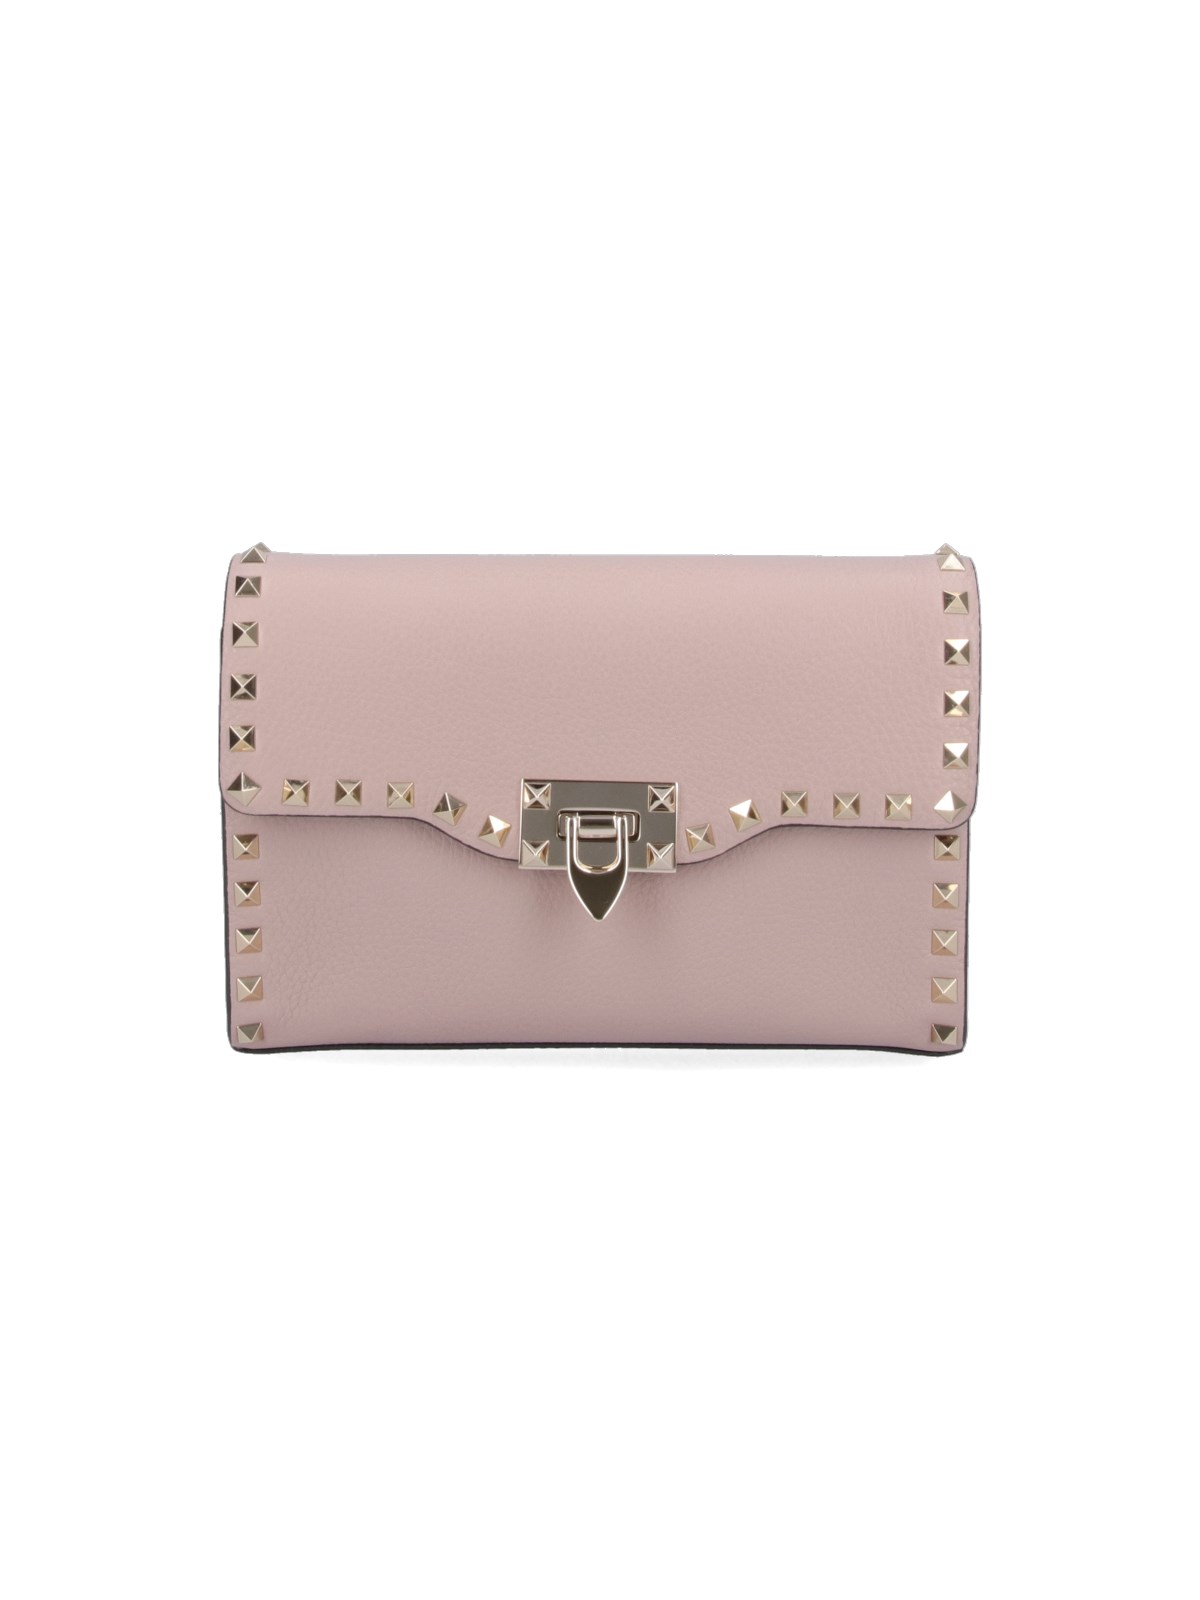 VALENTINO ROCKSTUD BAG in Sugared Pink Leather Chain Shoulder 